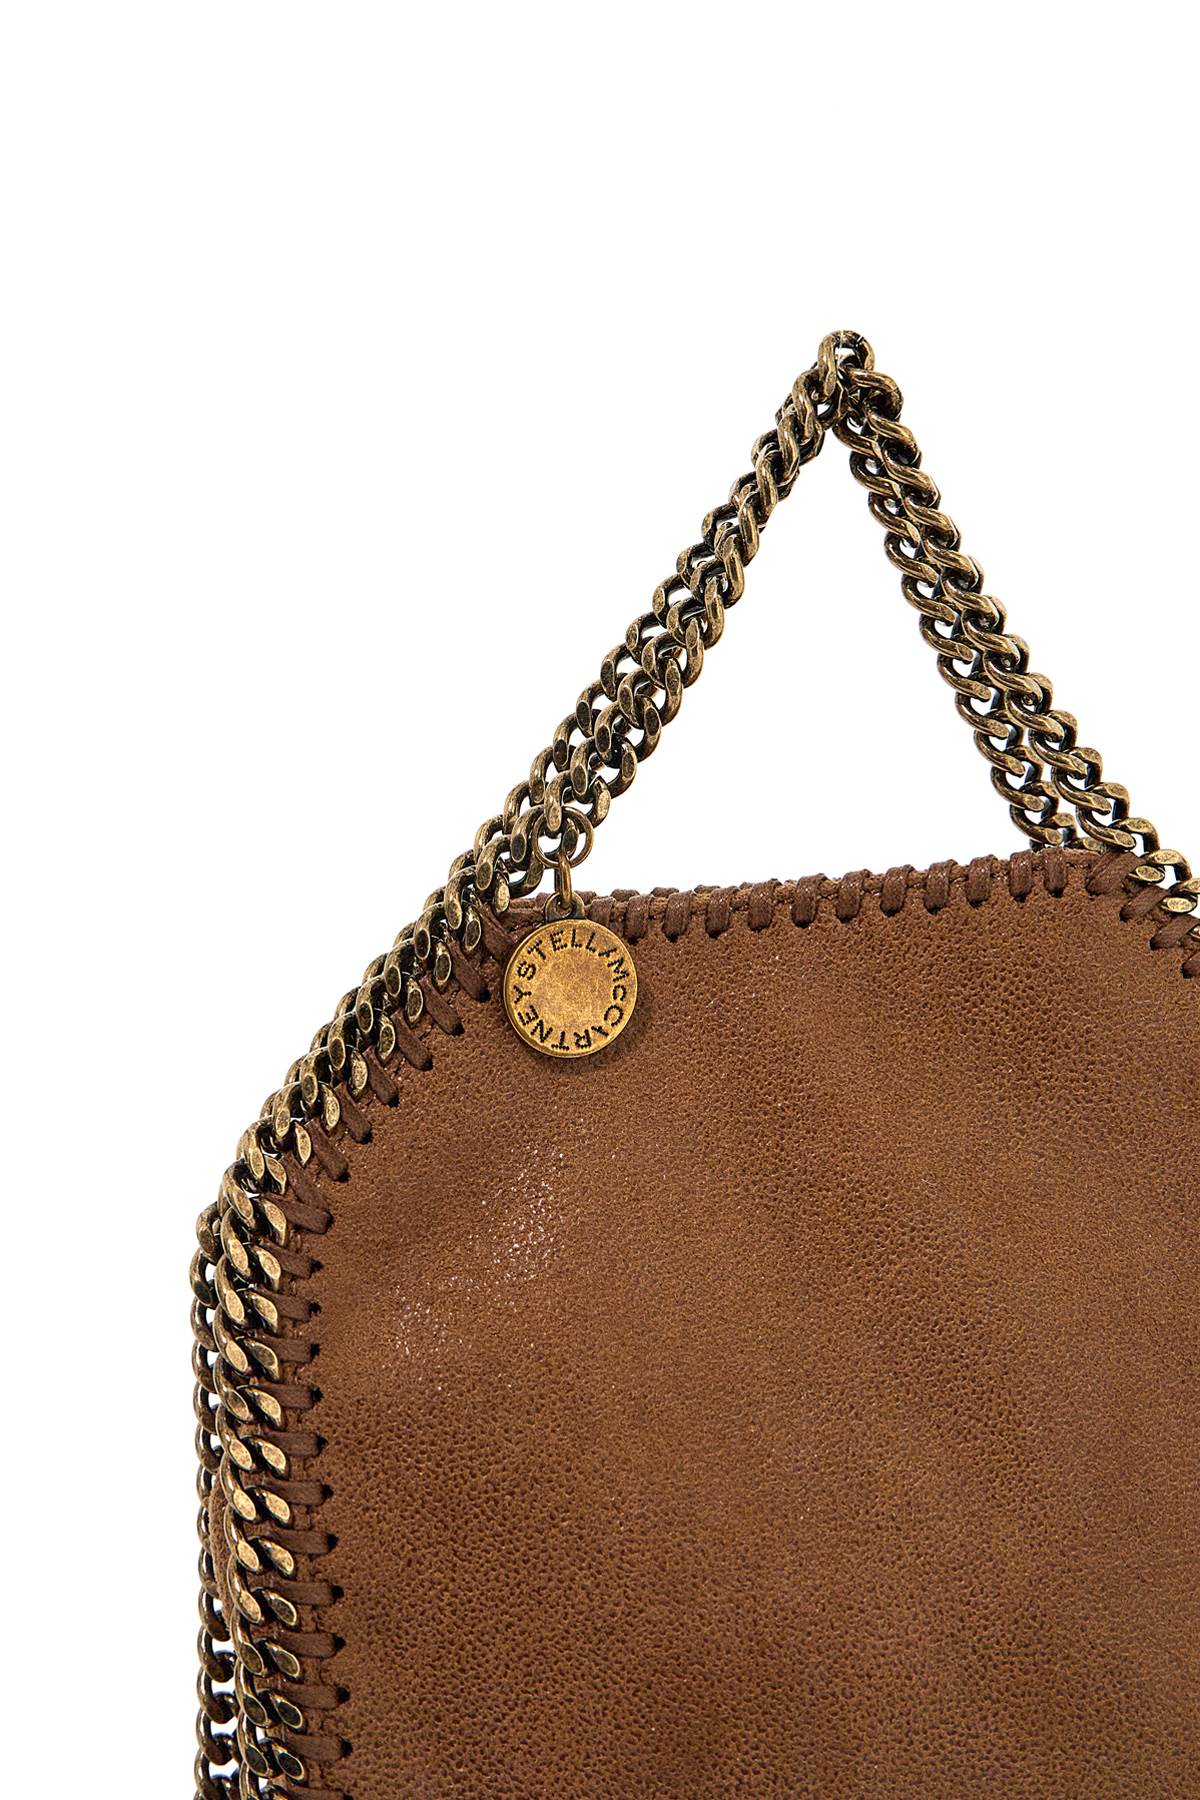 STELLA MCCARTNEY Faux Leather Tiny Falabella Handbag for Women - FW24 Collection